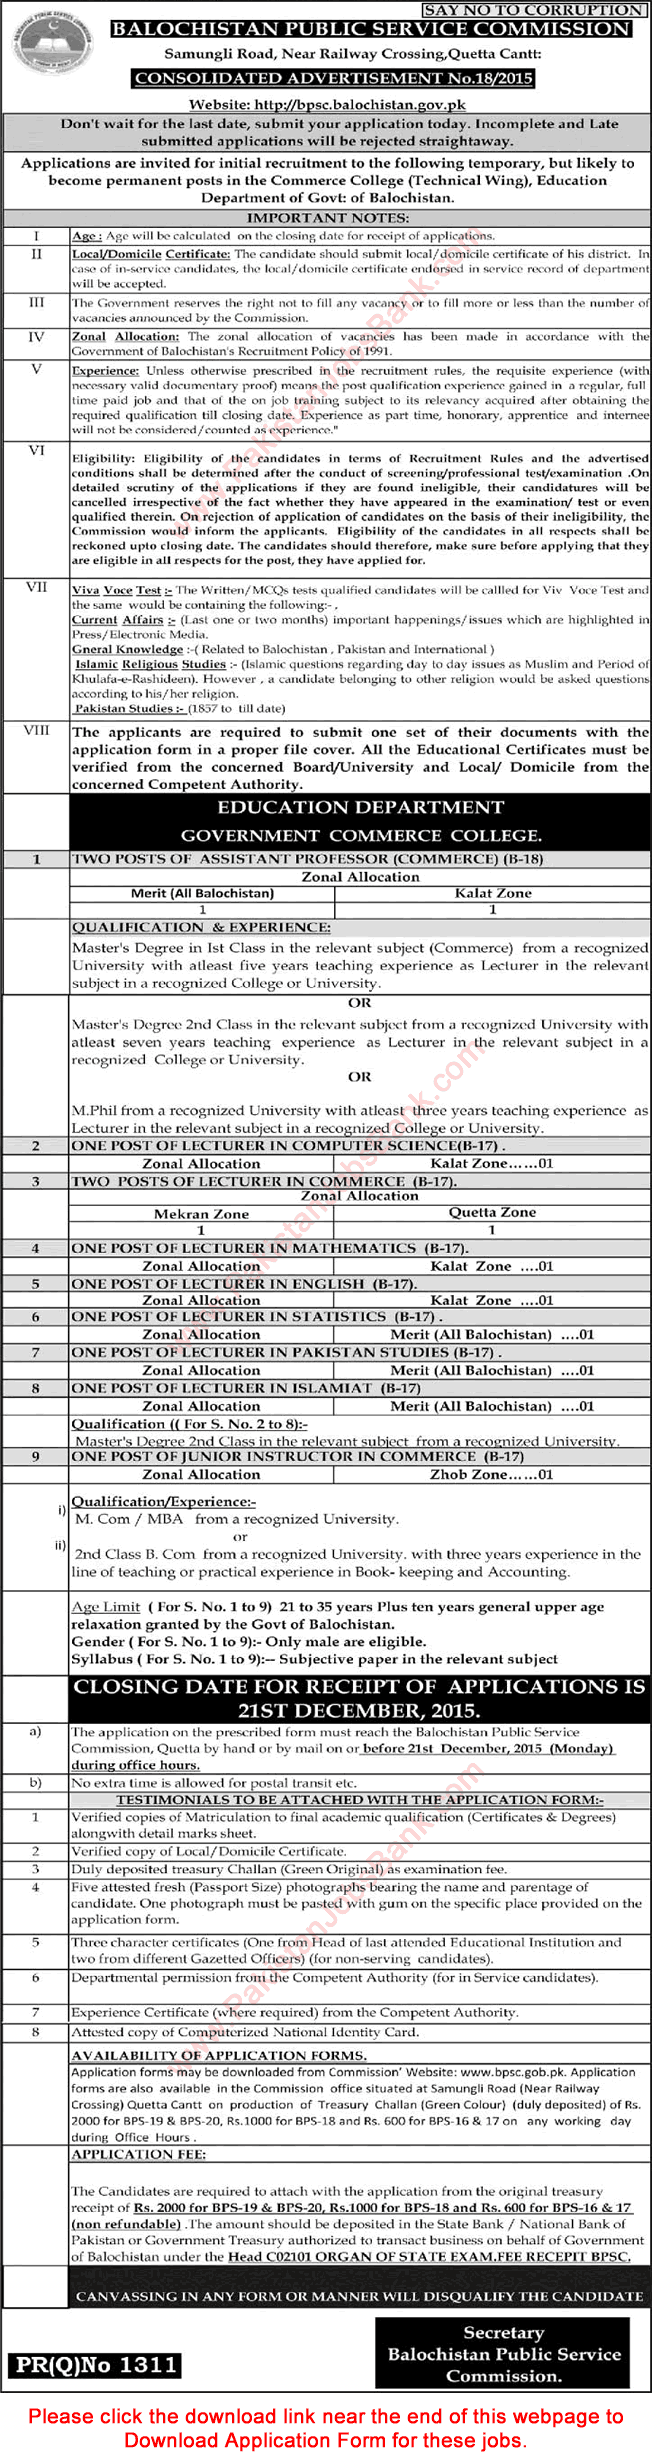 Balochistan Public Service Commission Jobs 2015 November BPSC Application Form Consolidated Advertisement No. 18/2015